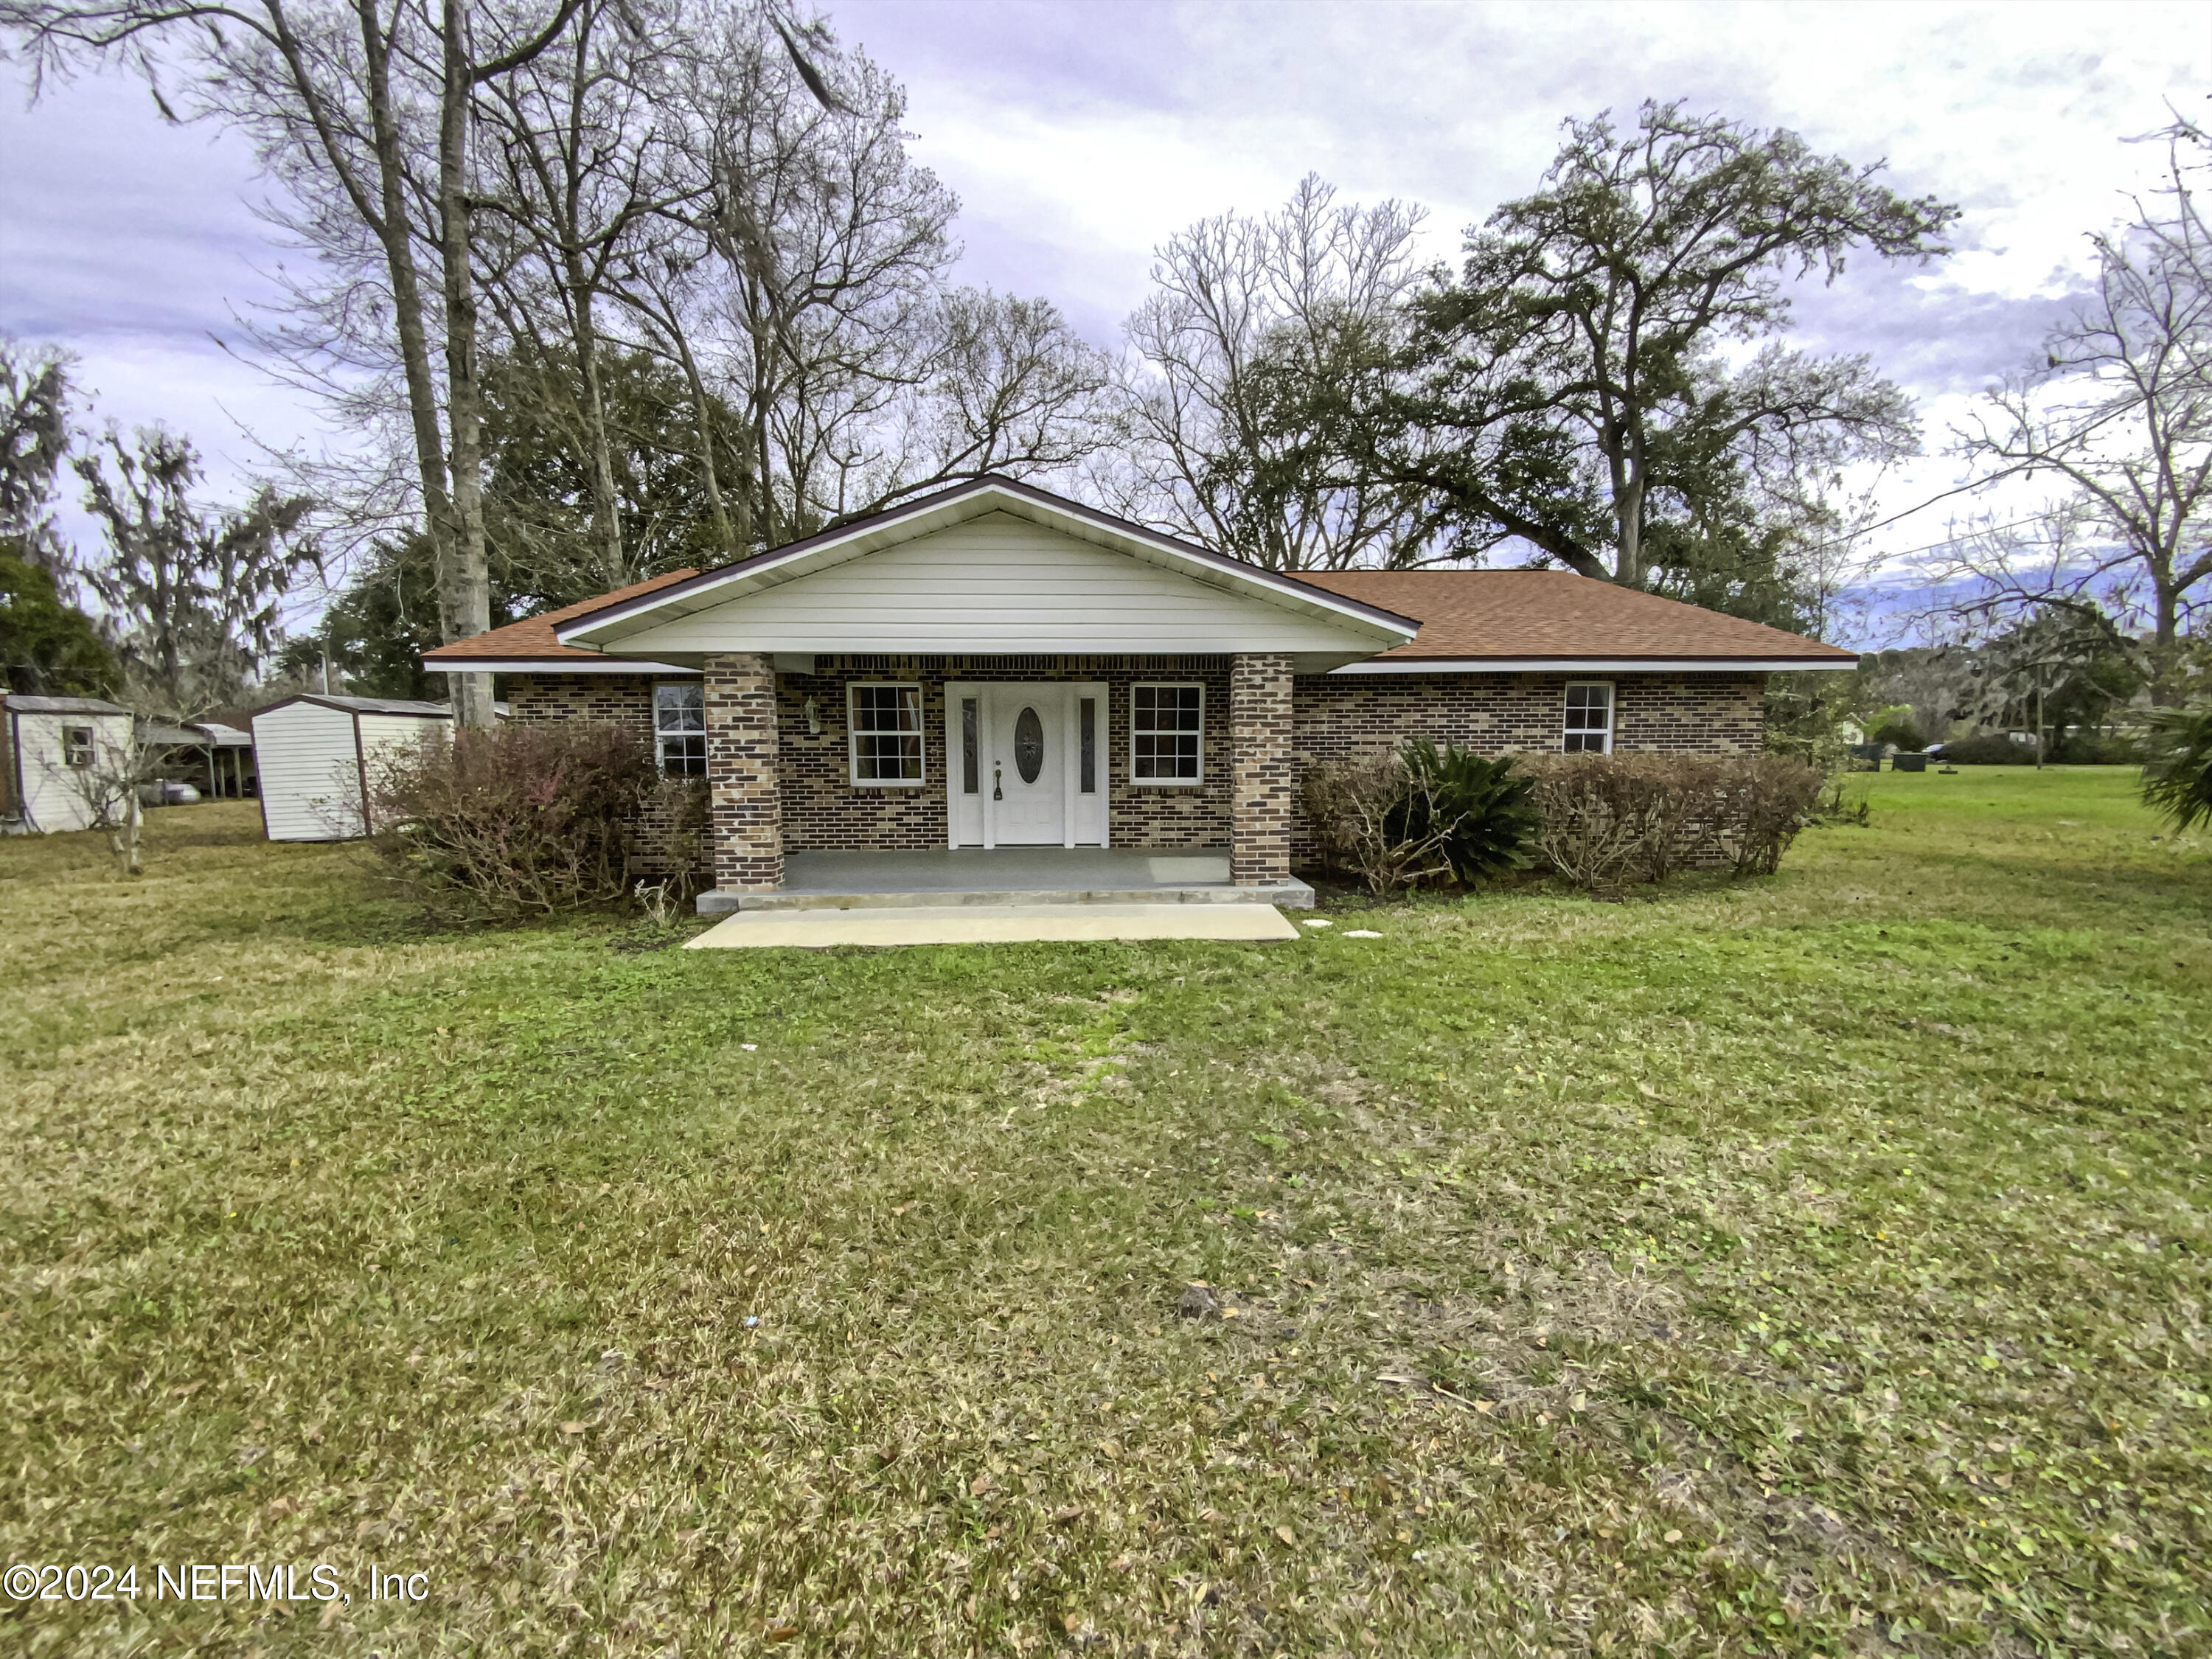 Jacksonville, FL home for sale located at 9849 S Lincoln Avenue, Jacksonville, FL 32040